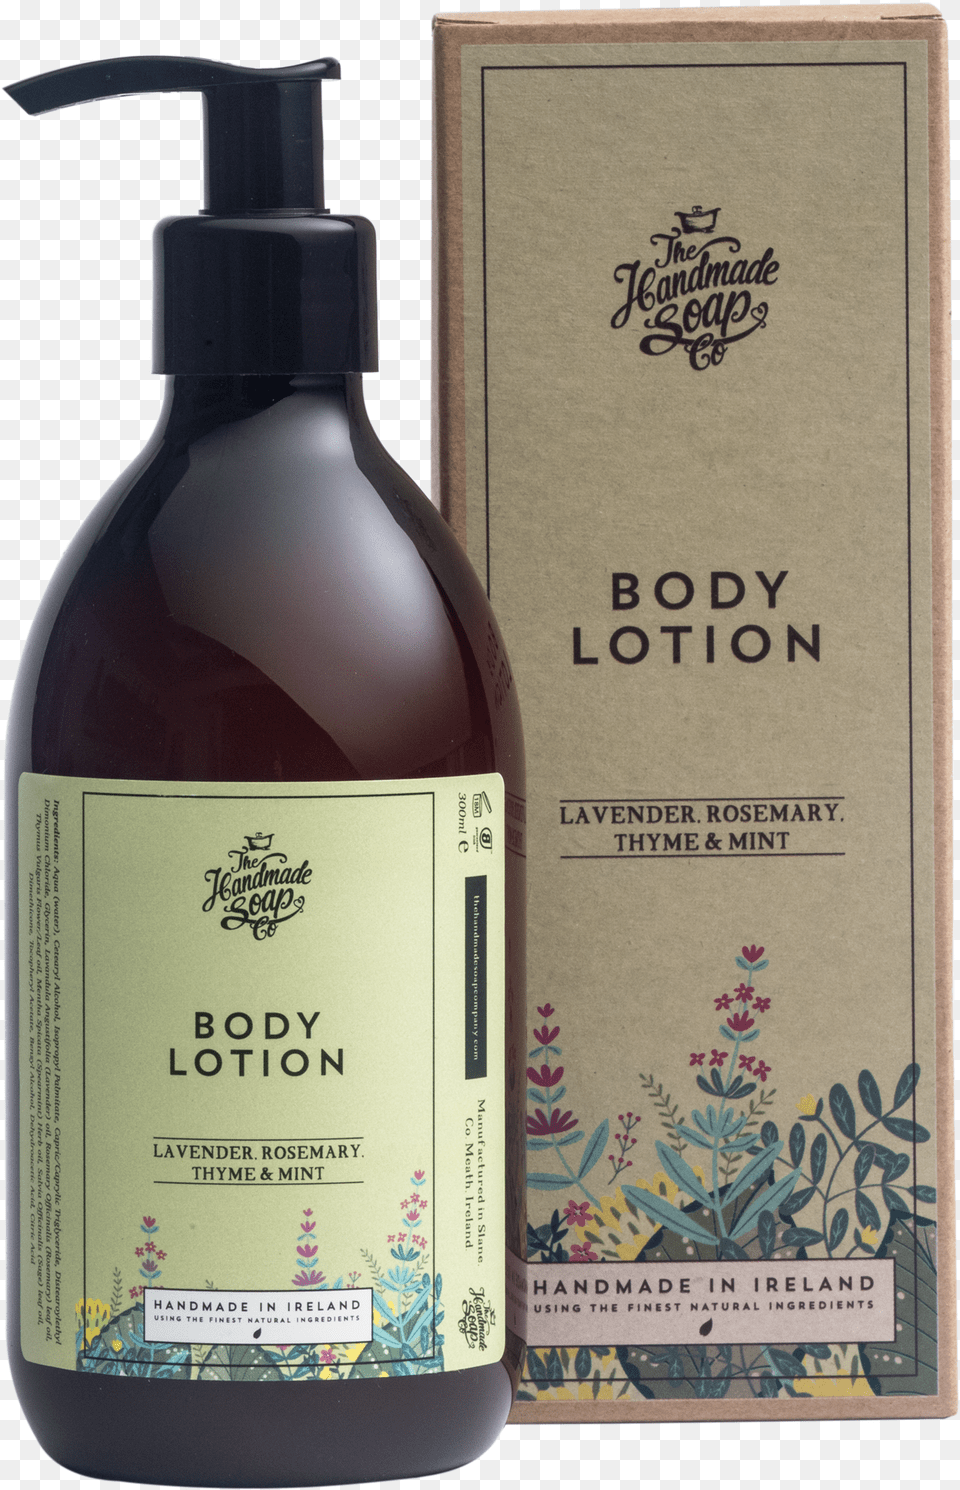 Lavender Rosemary Thyme Amp Mint Body Lotion, Bottle, Cosmetics, Perfume Free Png